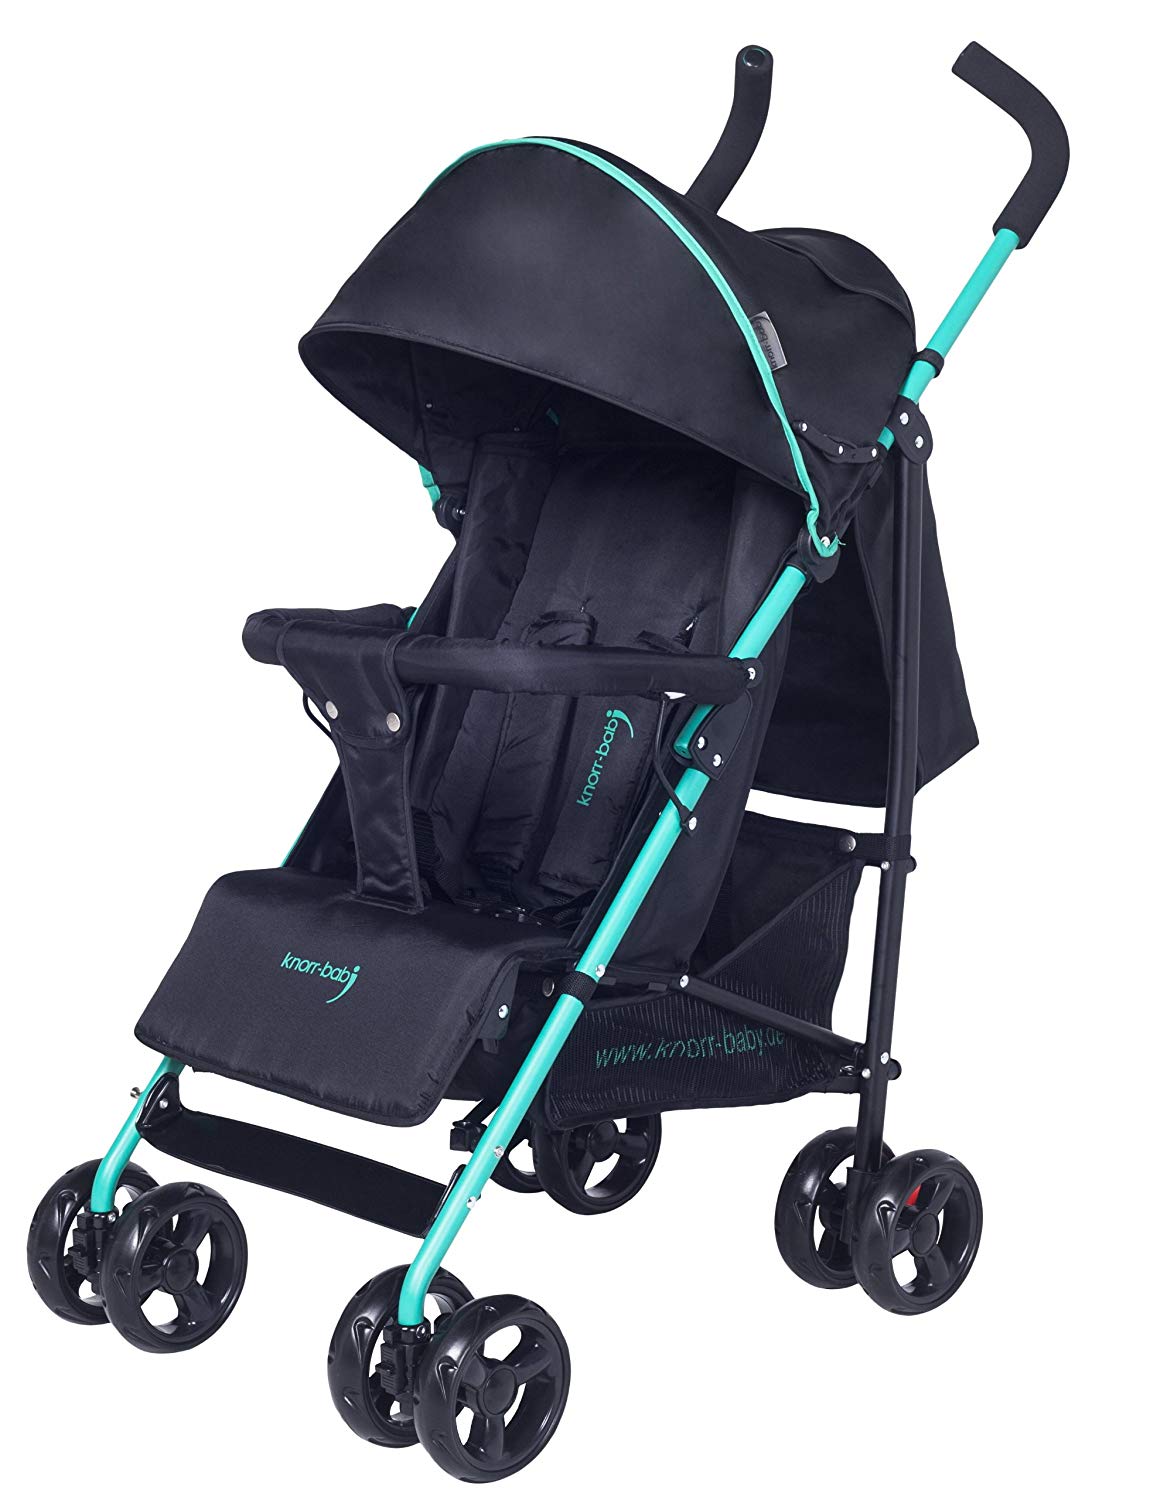 Knorr-Baby Styler 848001 Pushchair with Sleep Shade Black/Green